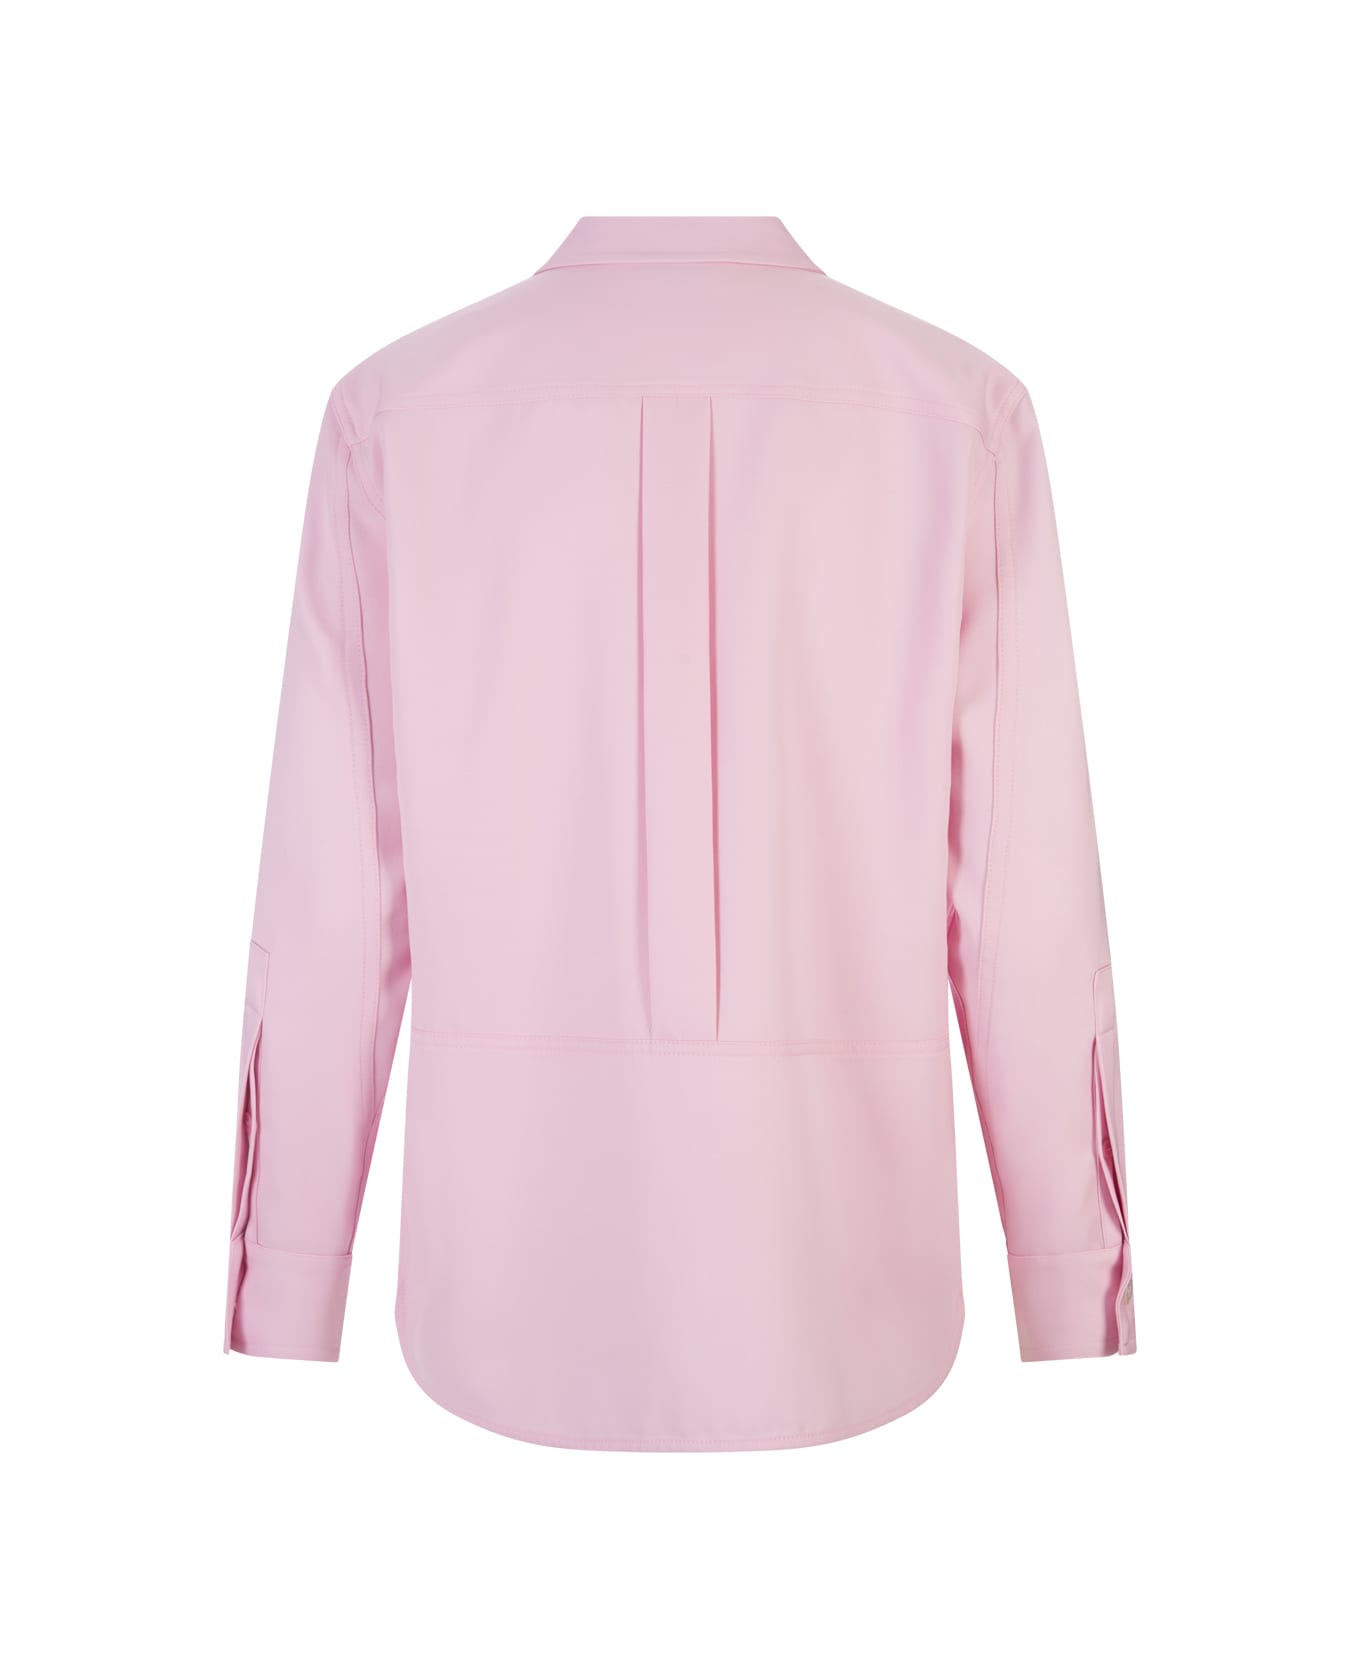 Alexander McQueen Shirt With Military Pockets In Light Pink - Pink シャツ